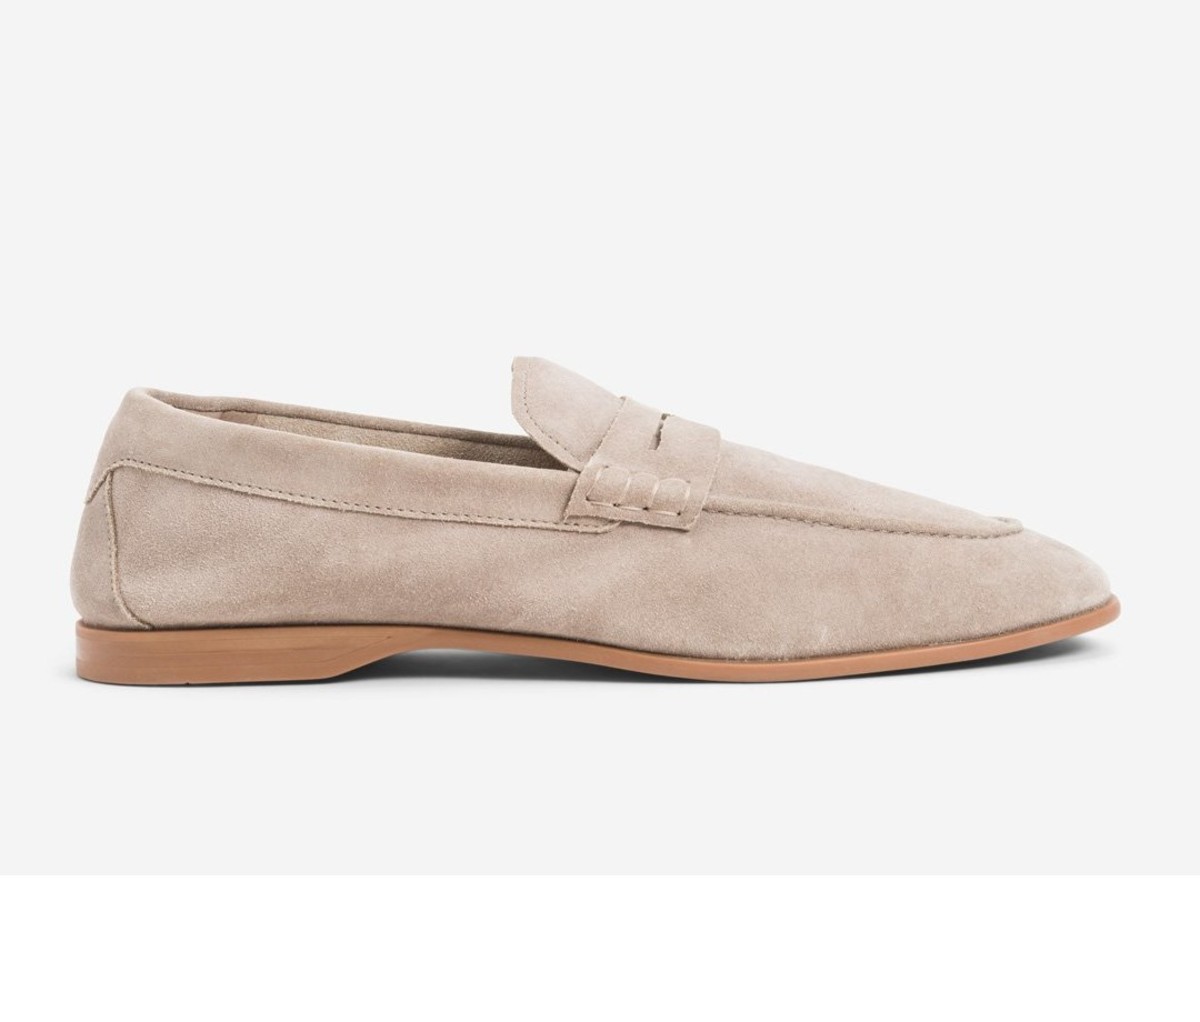 A Kenneth Cole Nolan Penny Loafer